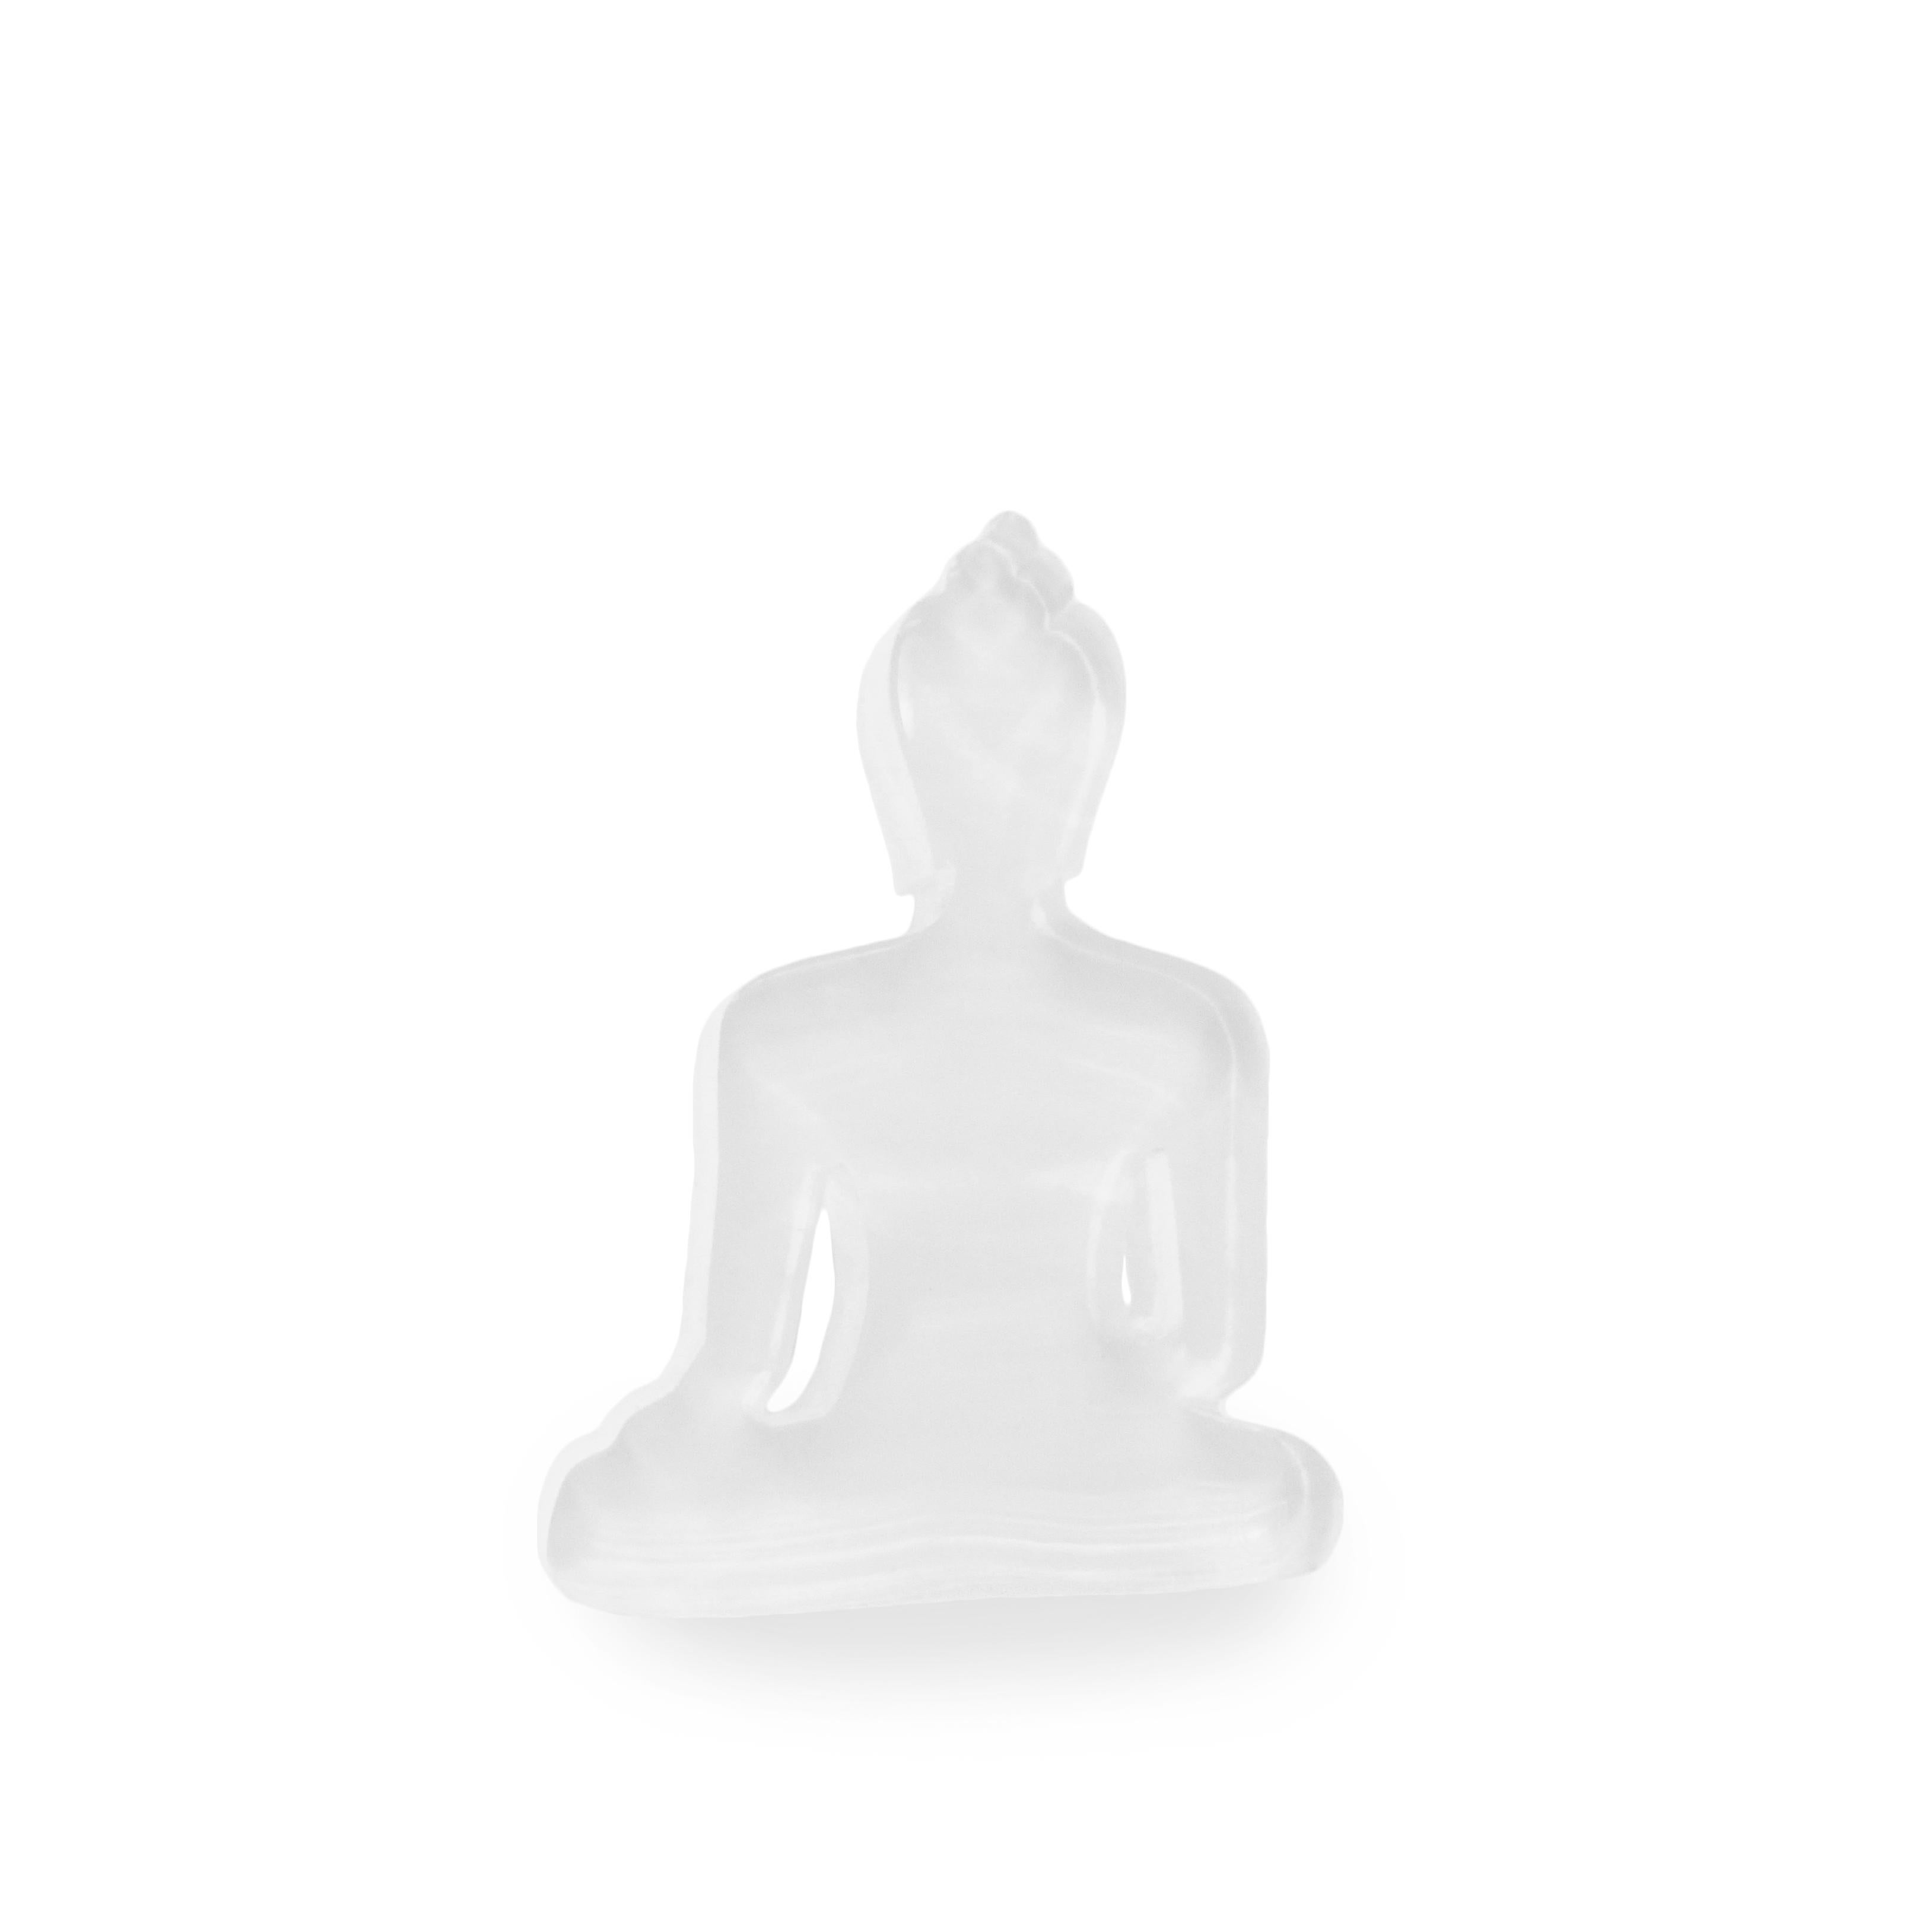 White mini Buddha statue - Contemporary Sculpture by Tal Nehoray